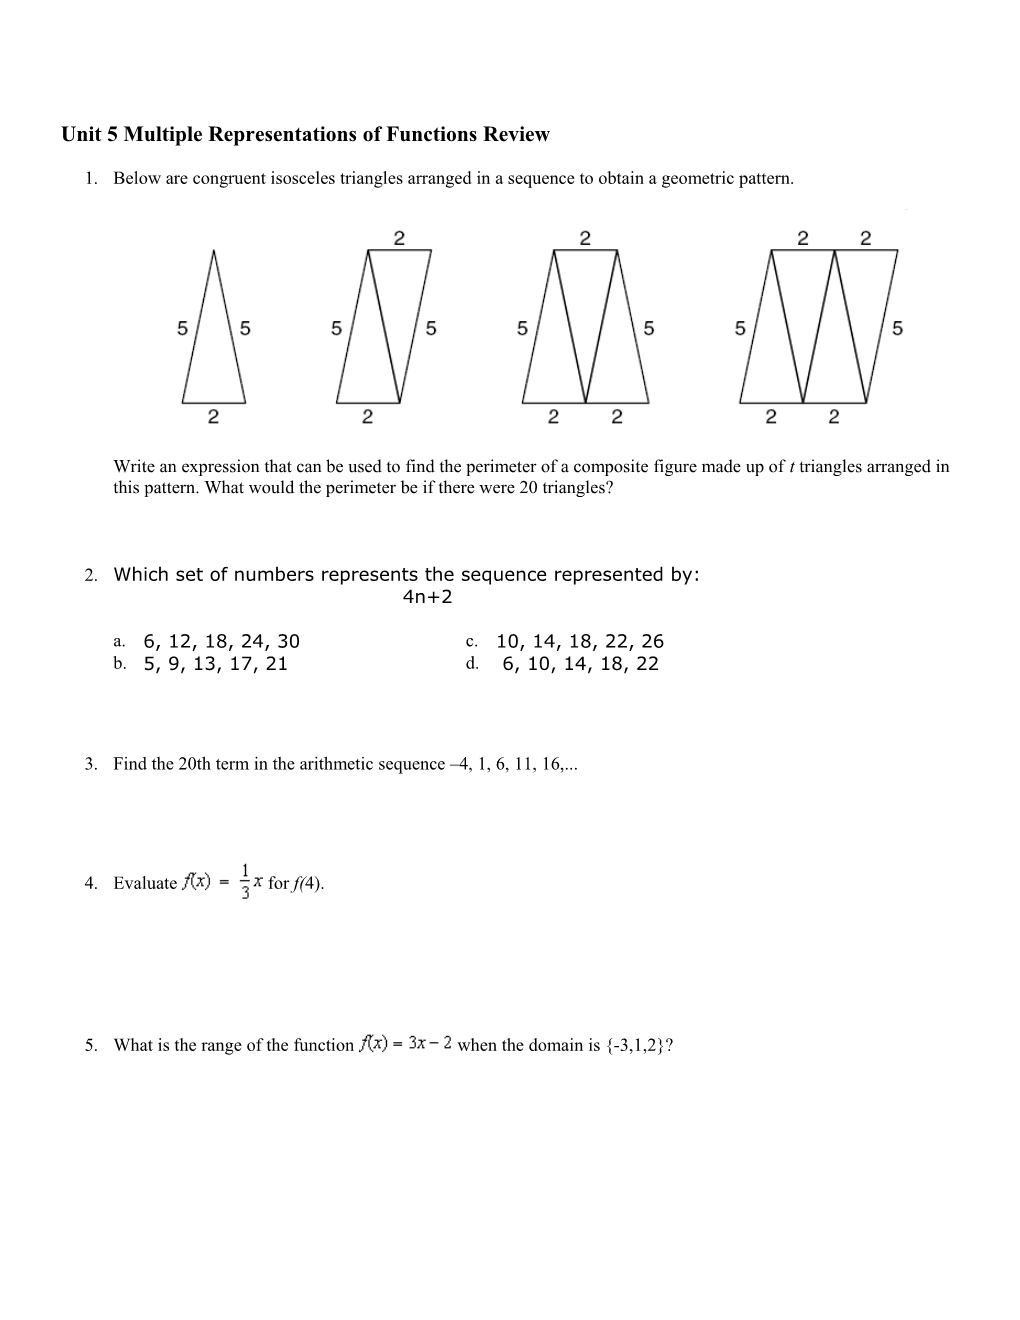 Unit 5 Multiple Representations of Functions Review